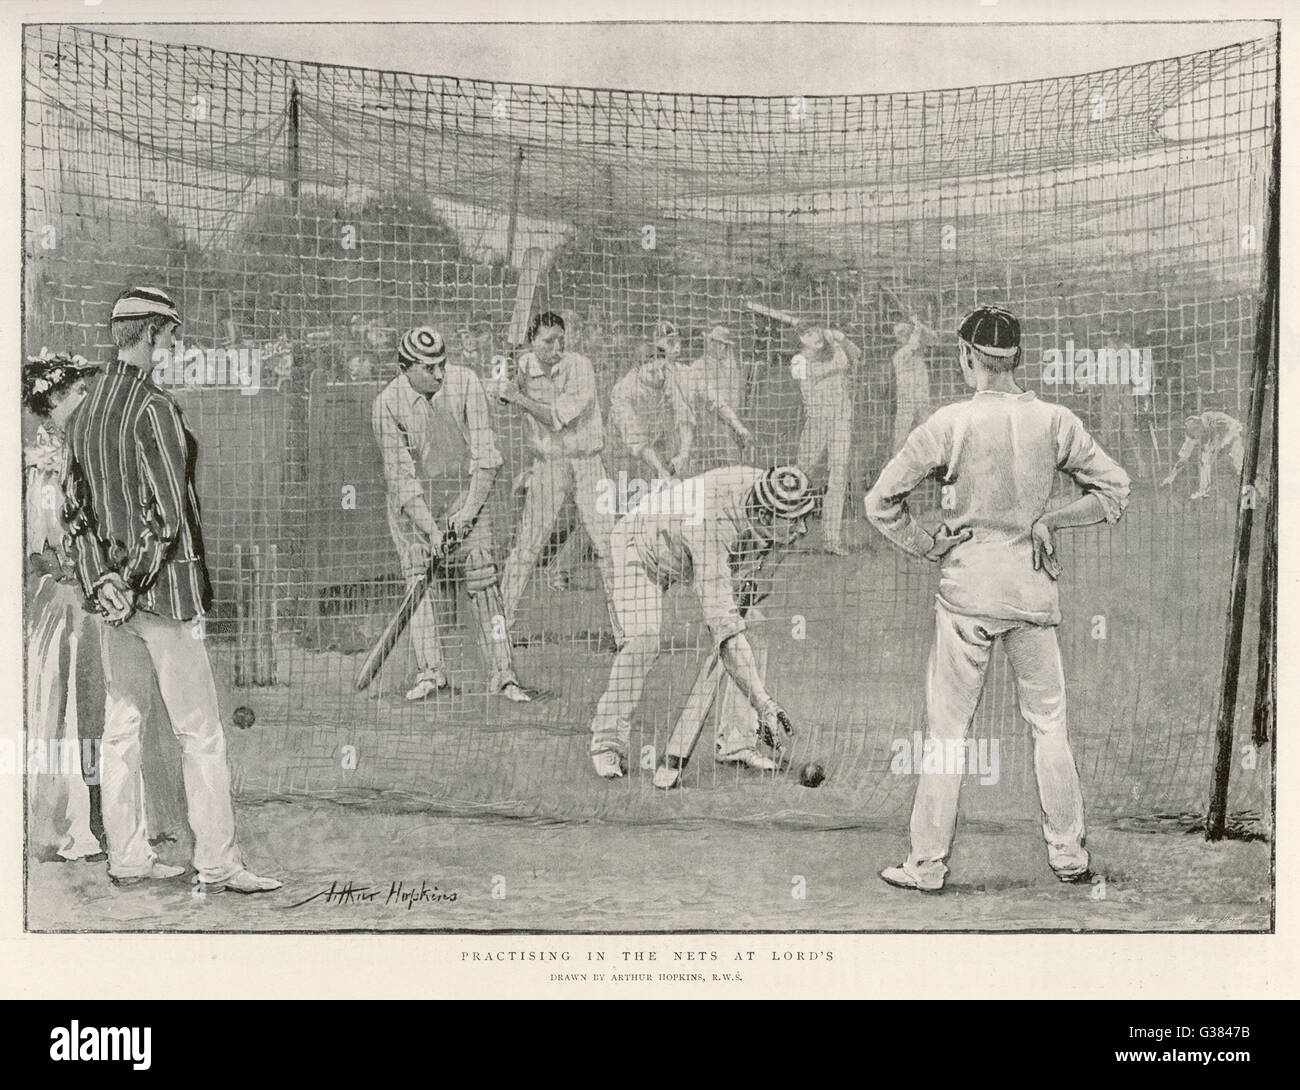 Practising in the nets          Date: 1894 Stock Photo